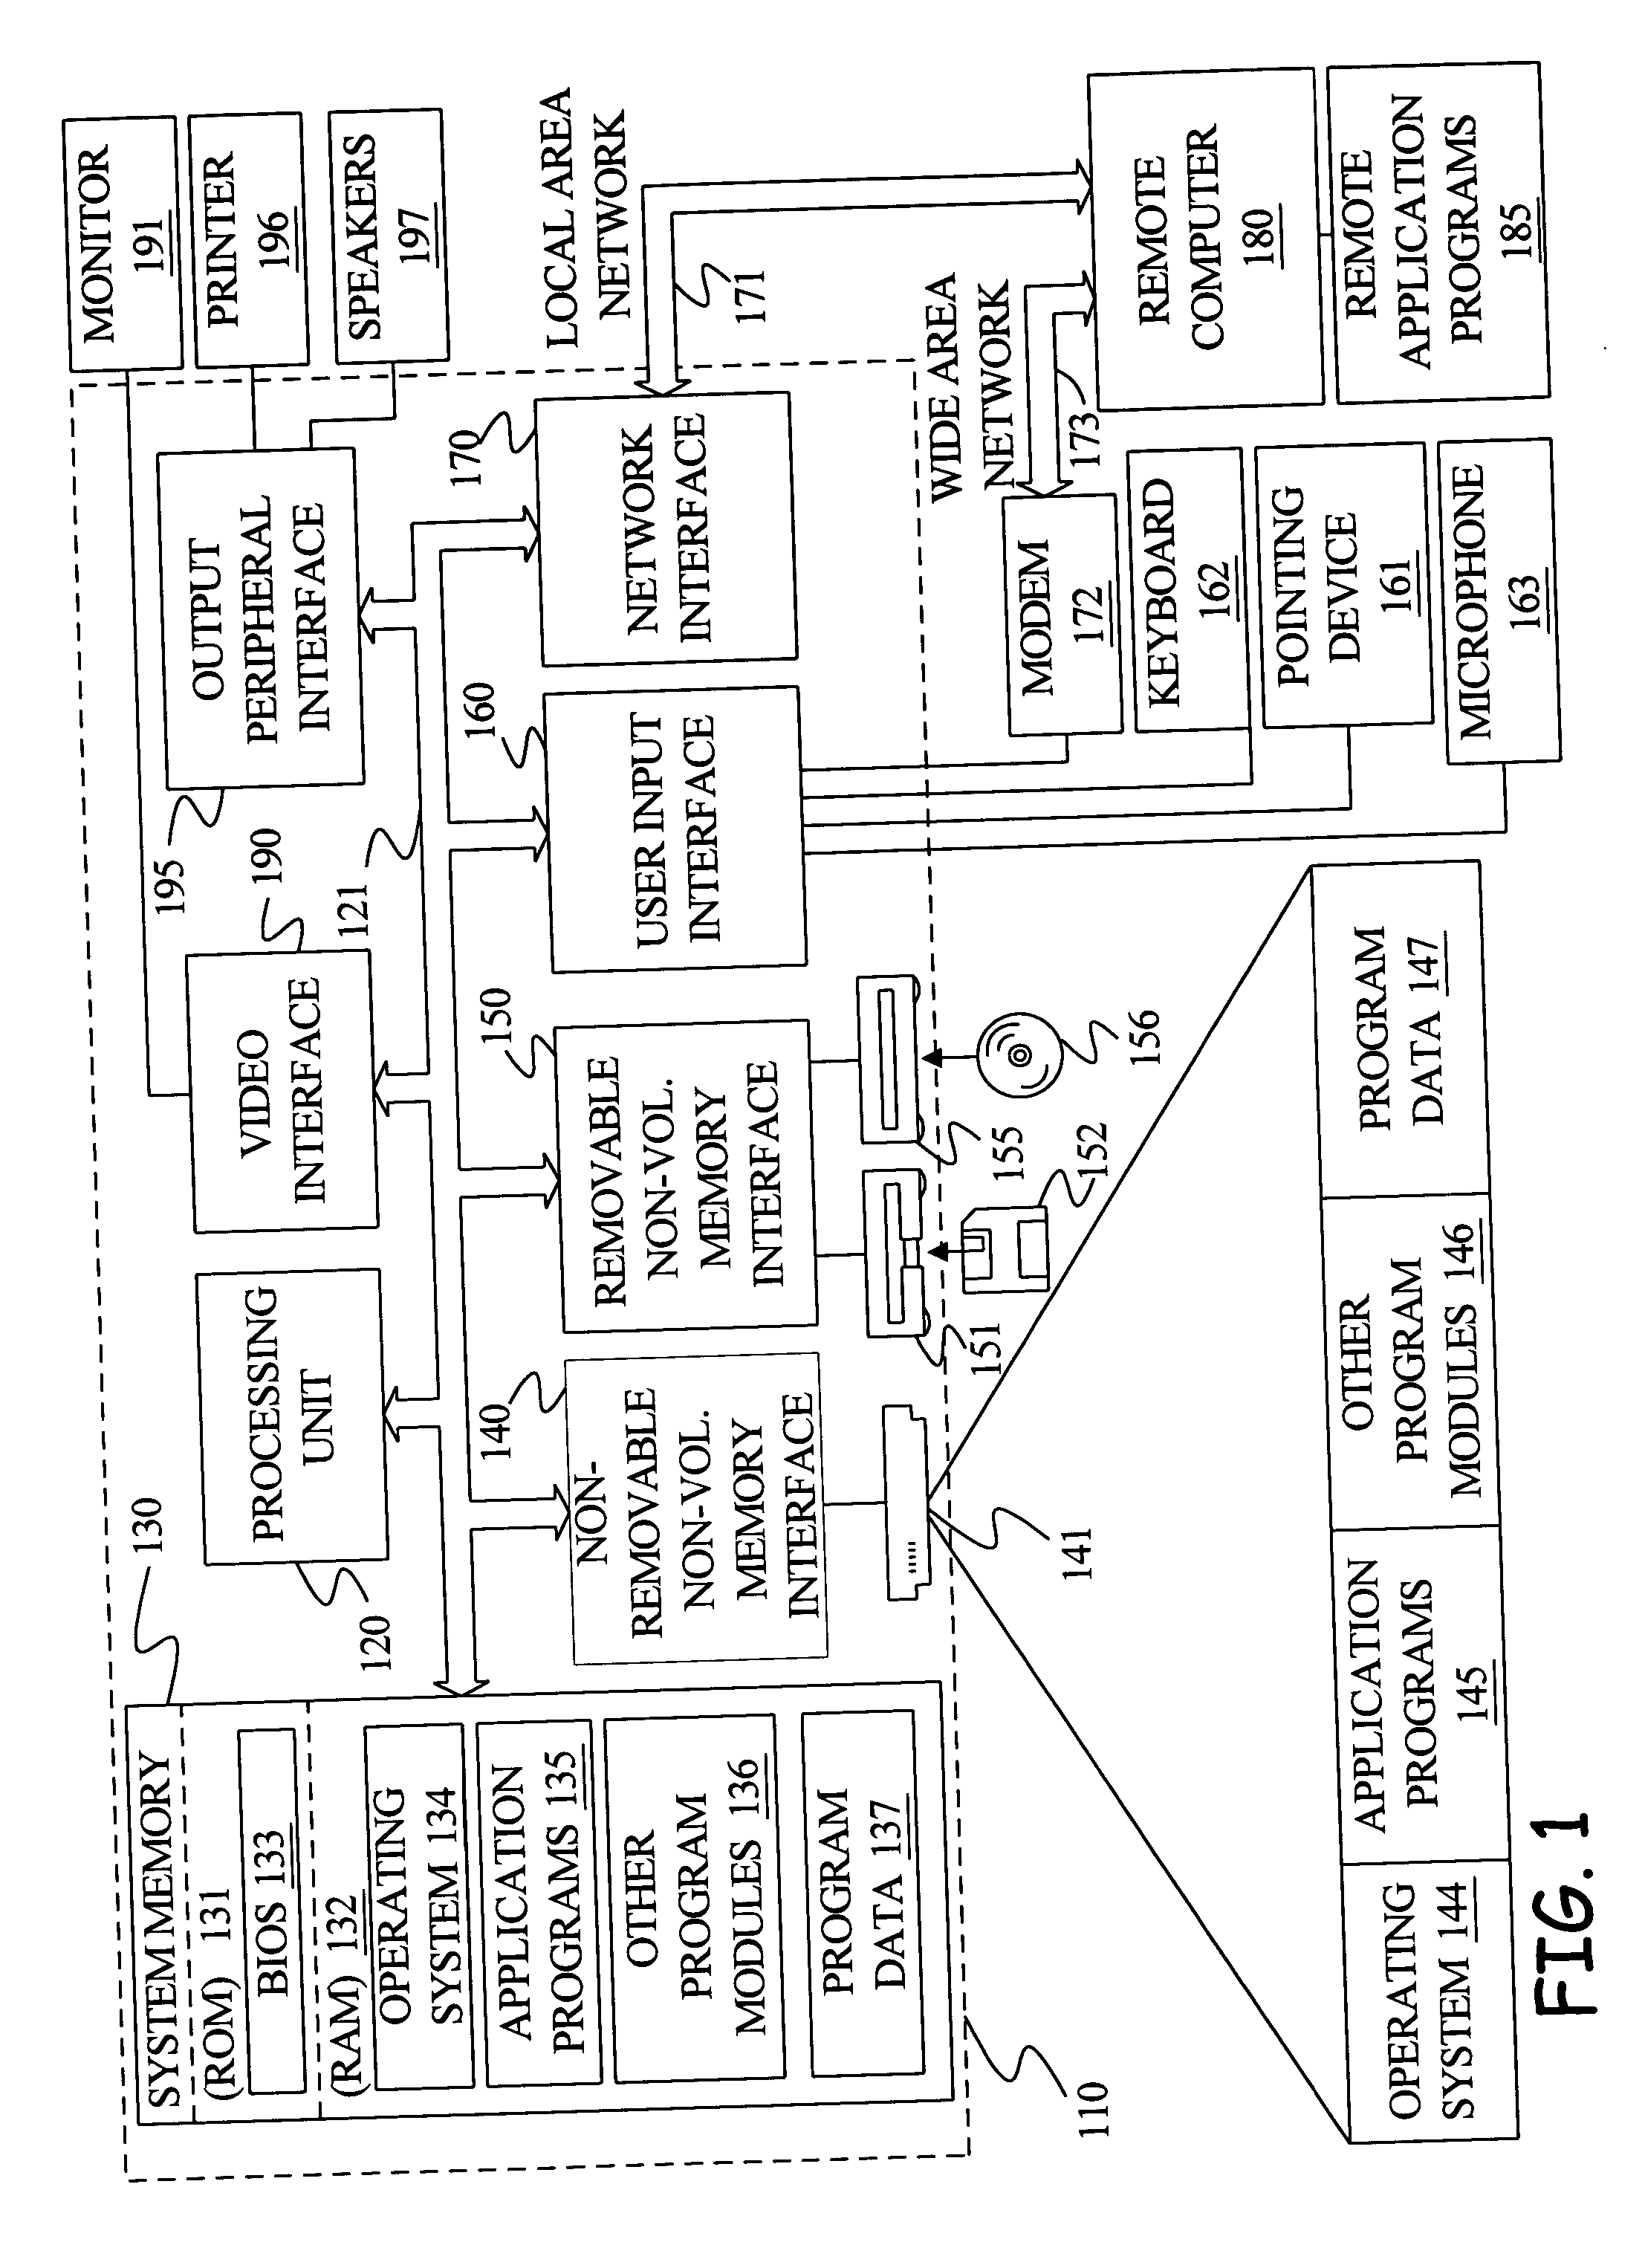 Computer aided query to task mapping